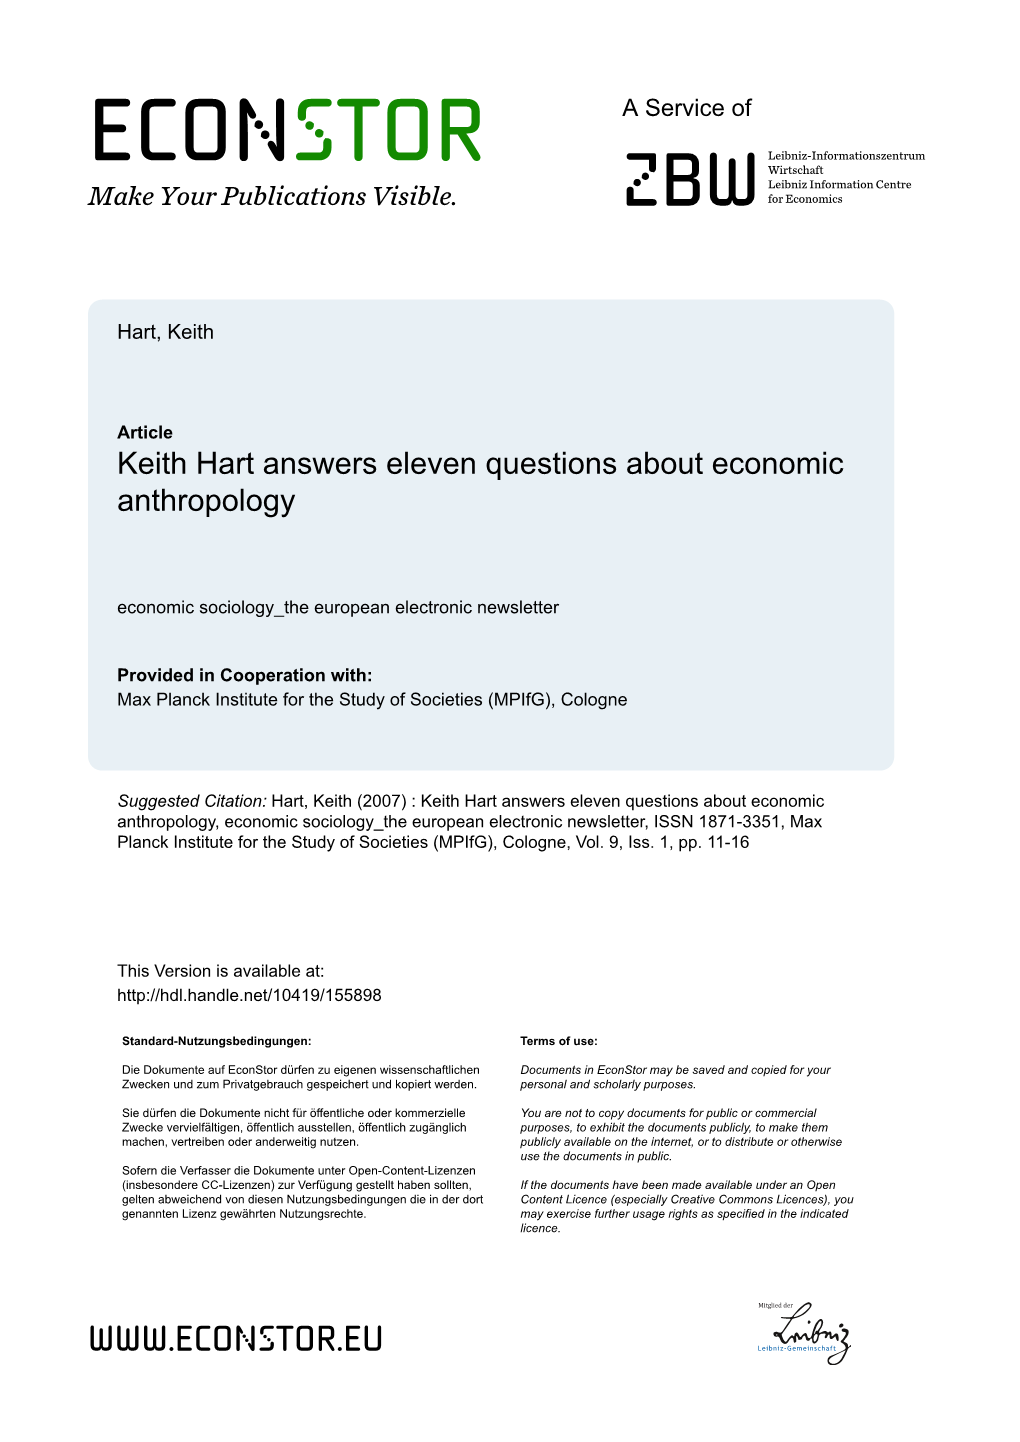 Keith Hart Answers Eleven Questions About Economic Anthropology